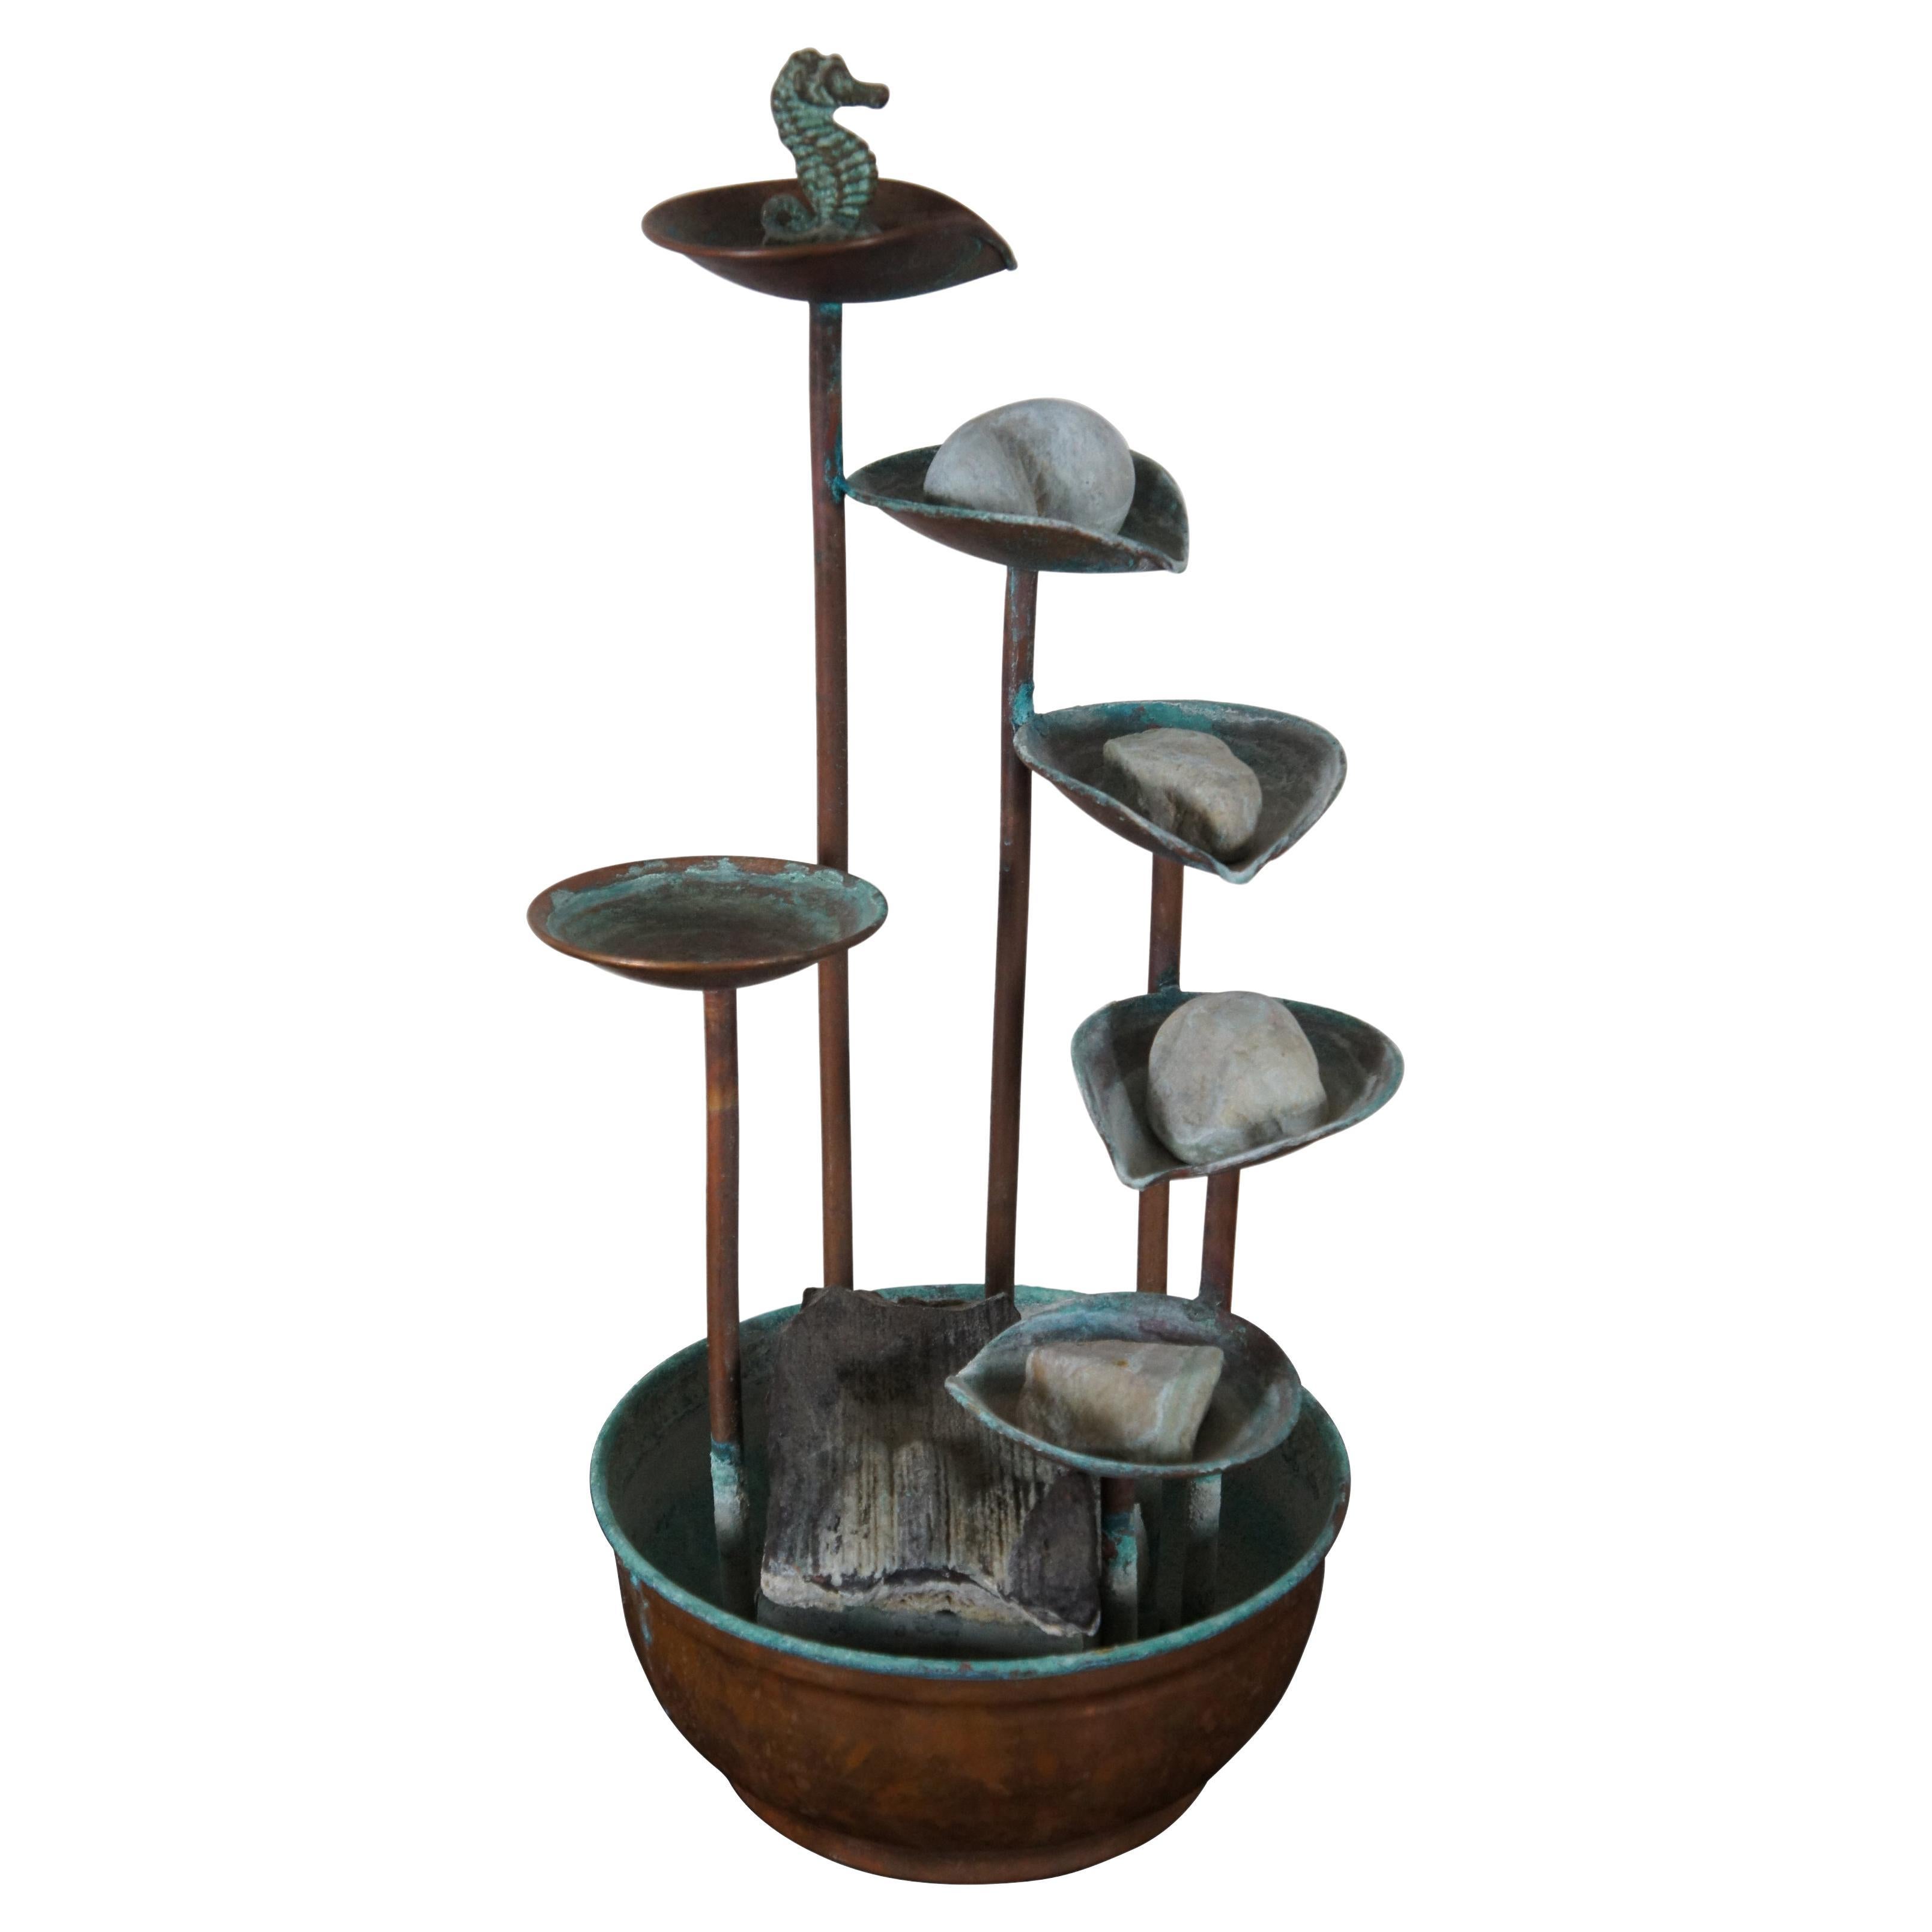 Vintage six tier copper waterfall fountain or water feature with sea horse topper. Pump works.
    